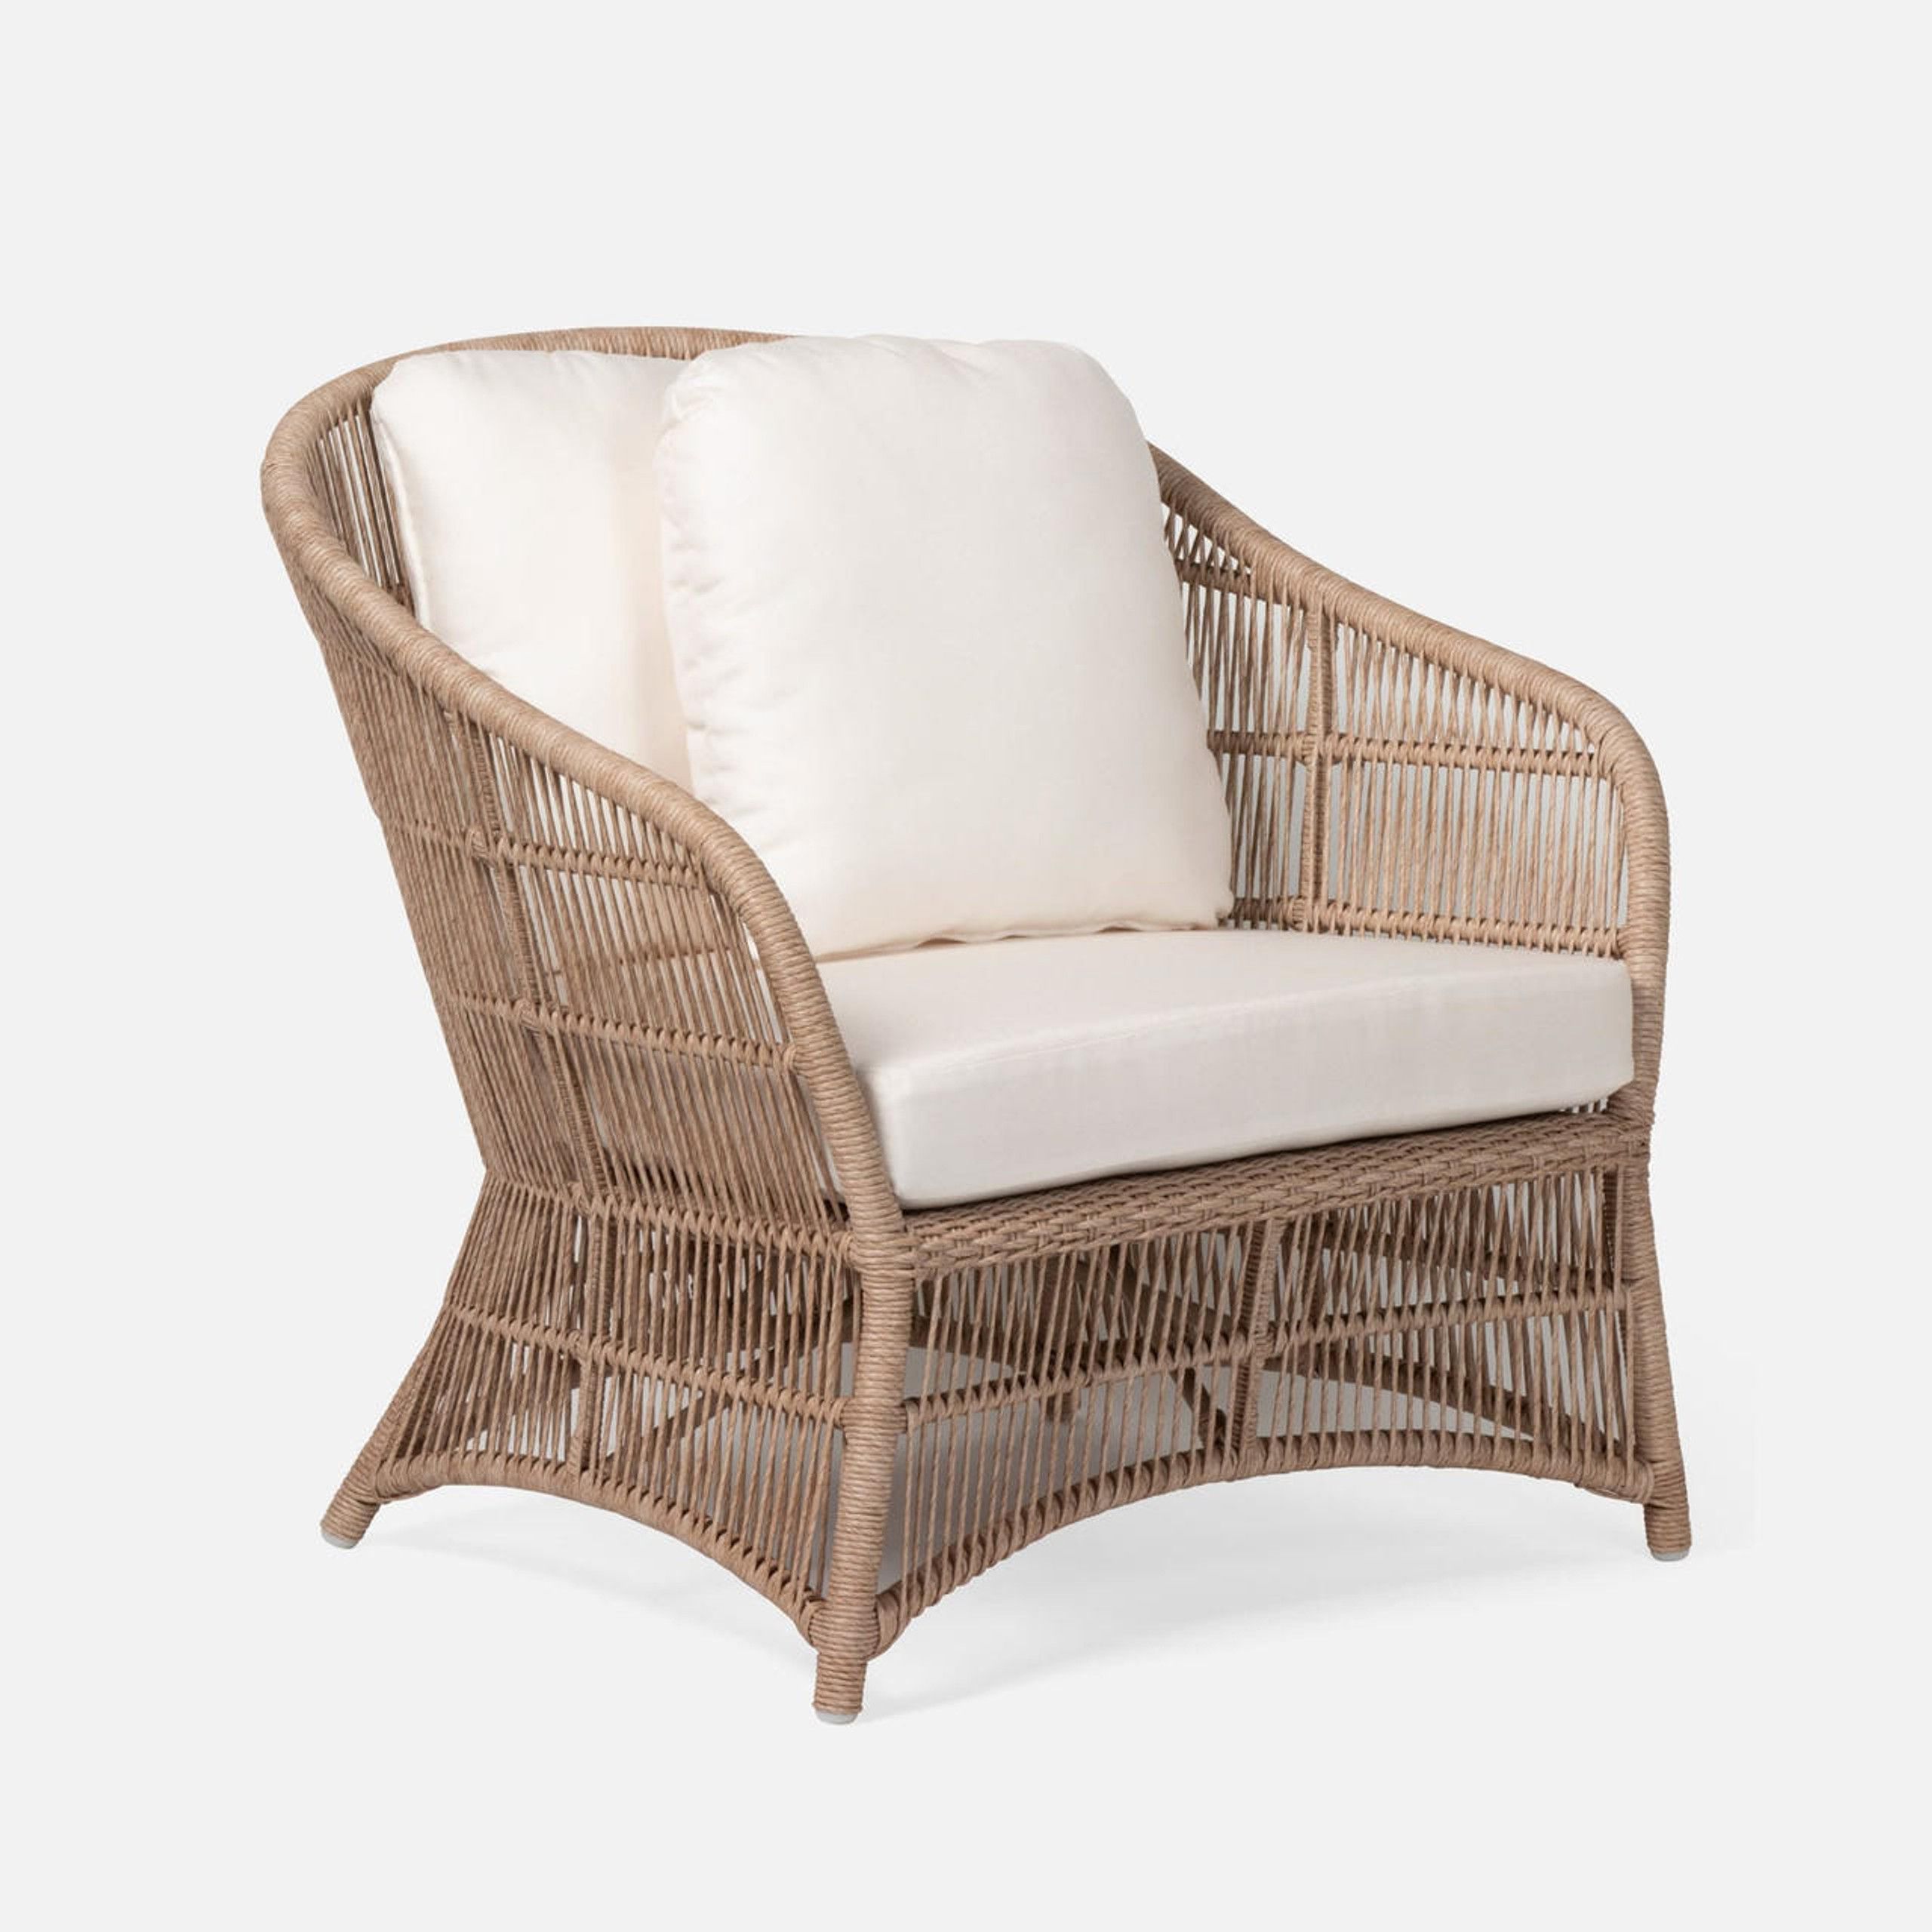 Soma Natural Outdoor Lounge Chair (Interchangeable Cushions)
                    
    
        
 ... | Belle and June